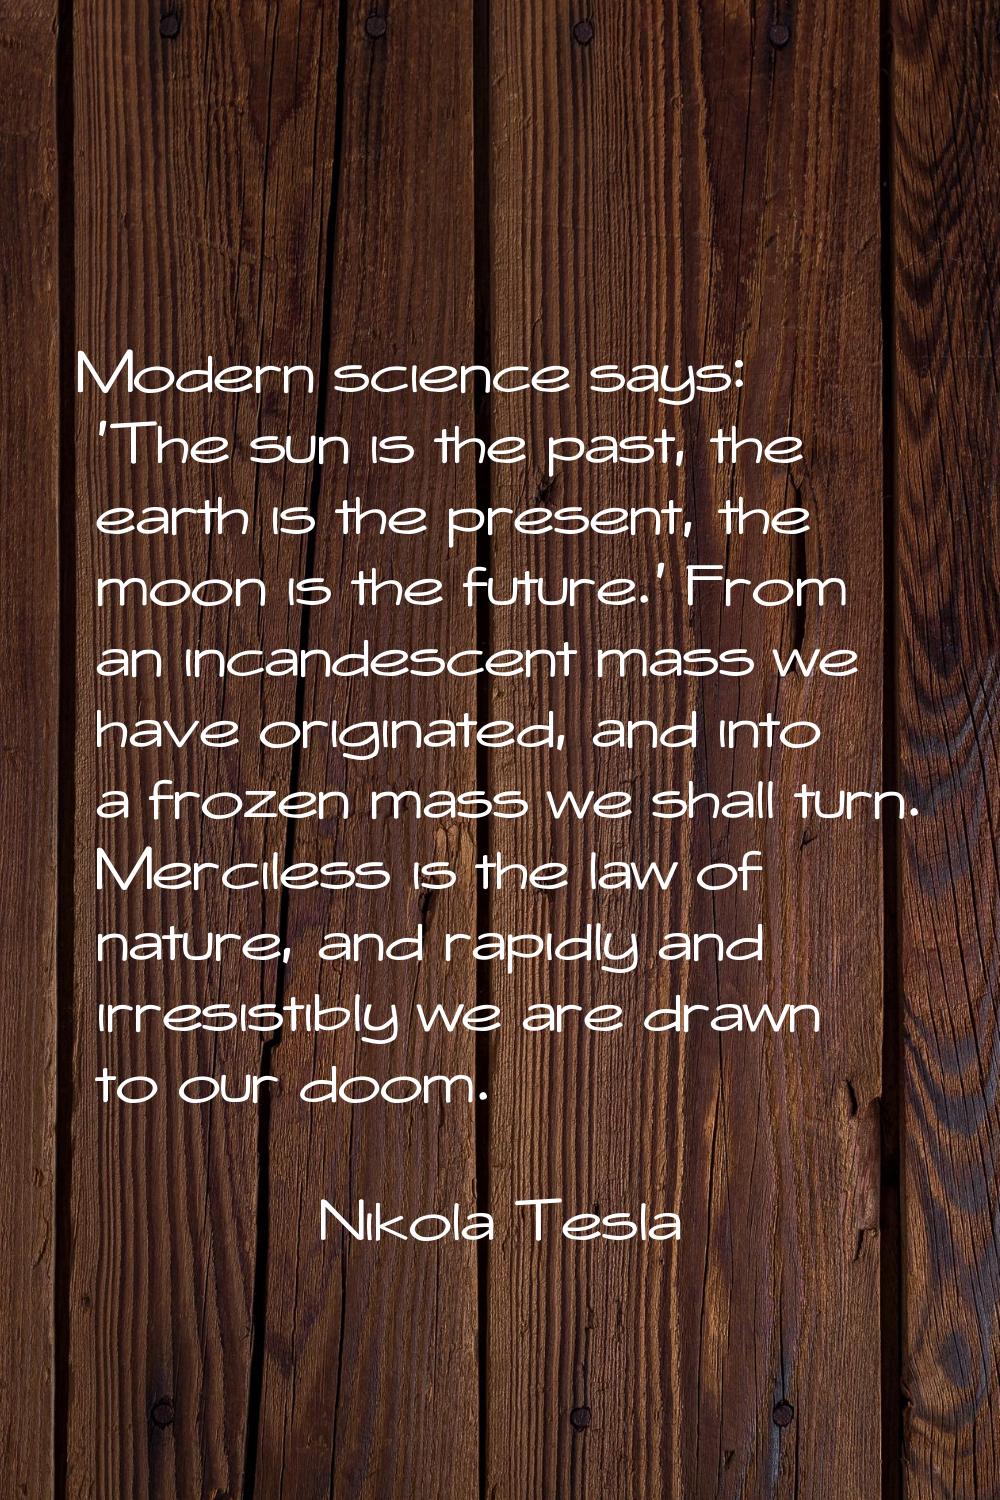 Modern science says: 'The sun is the past, the earth is the present, the moon is the future.' From 